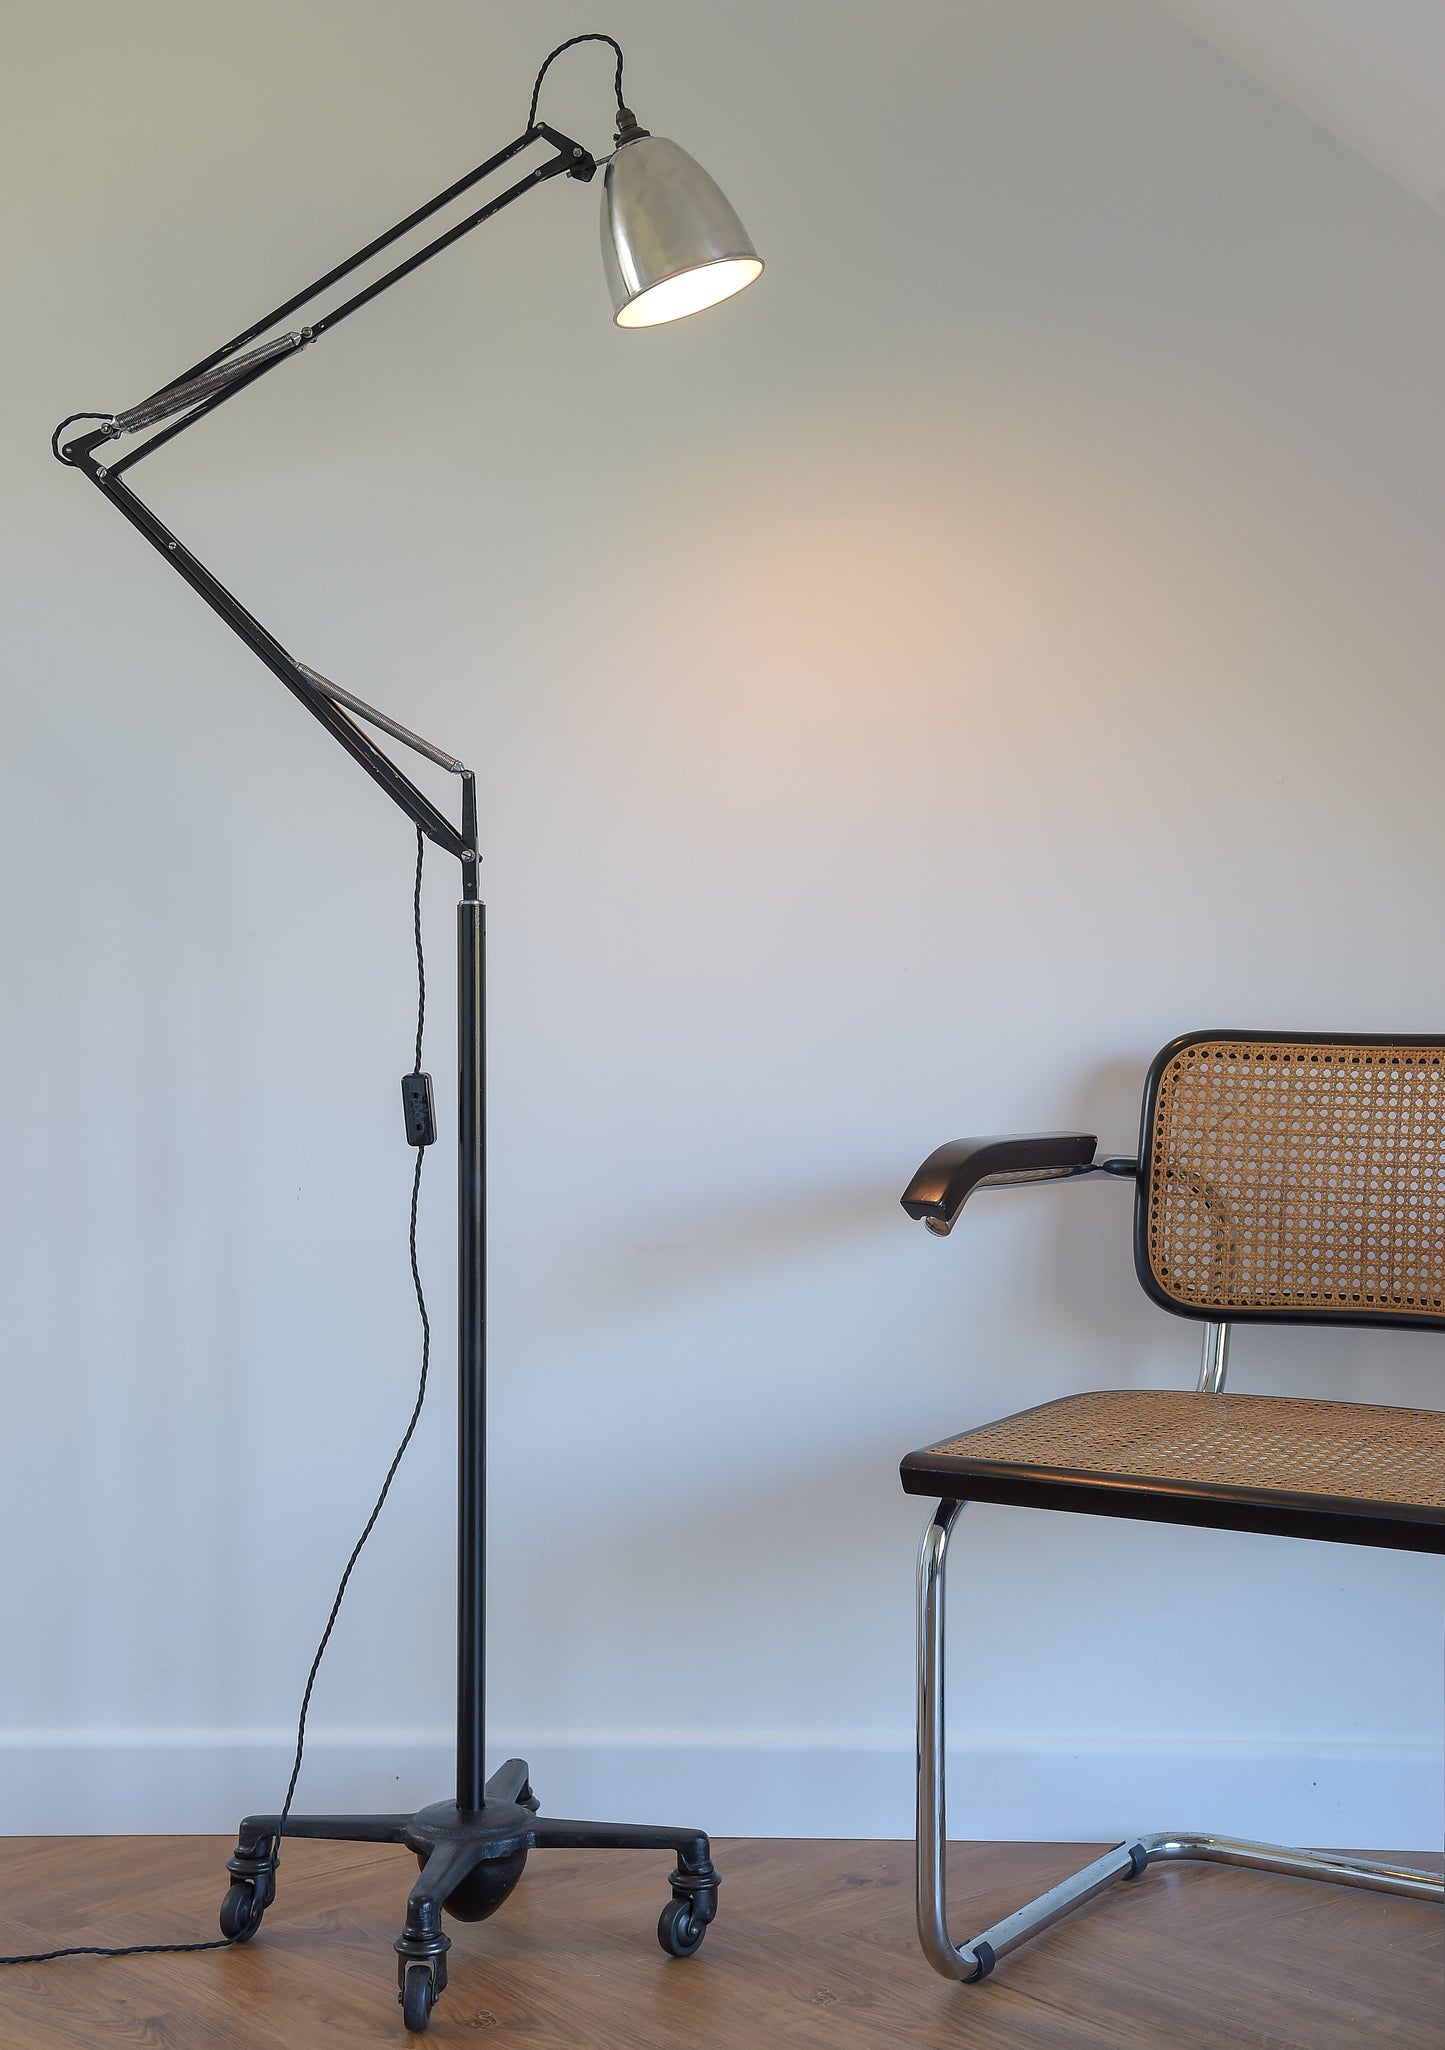 Anglepoise Trolley Lamp Designed By George Cawardine. English 1950's